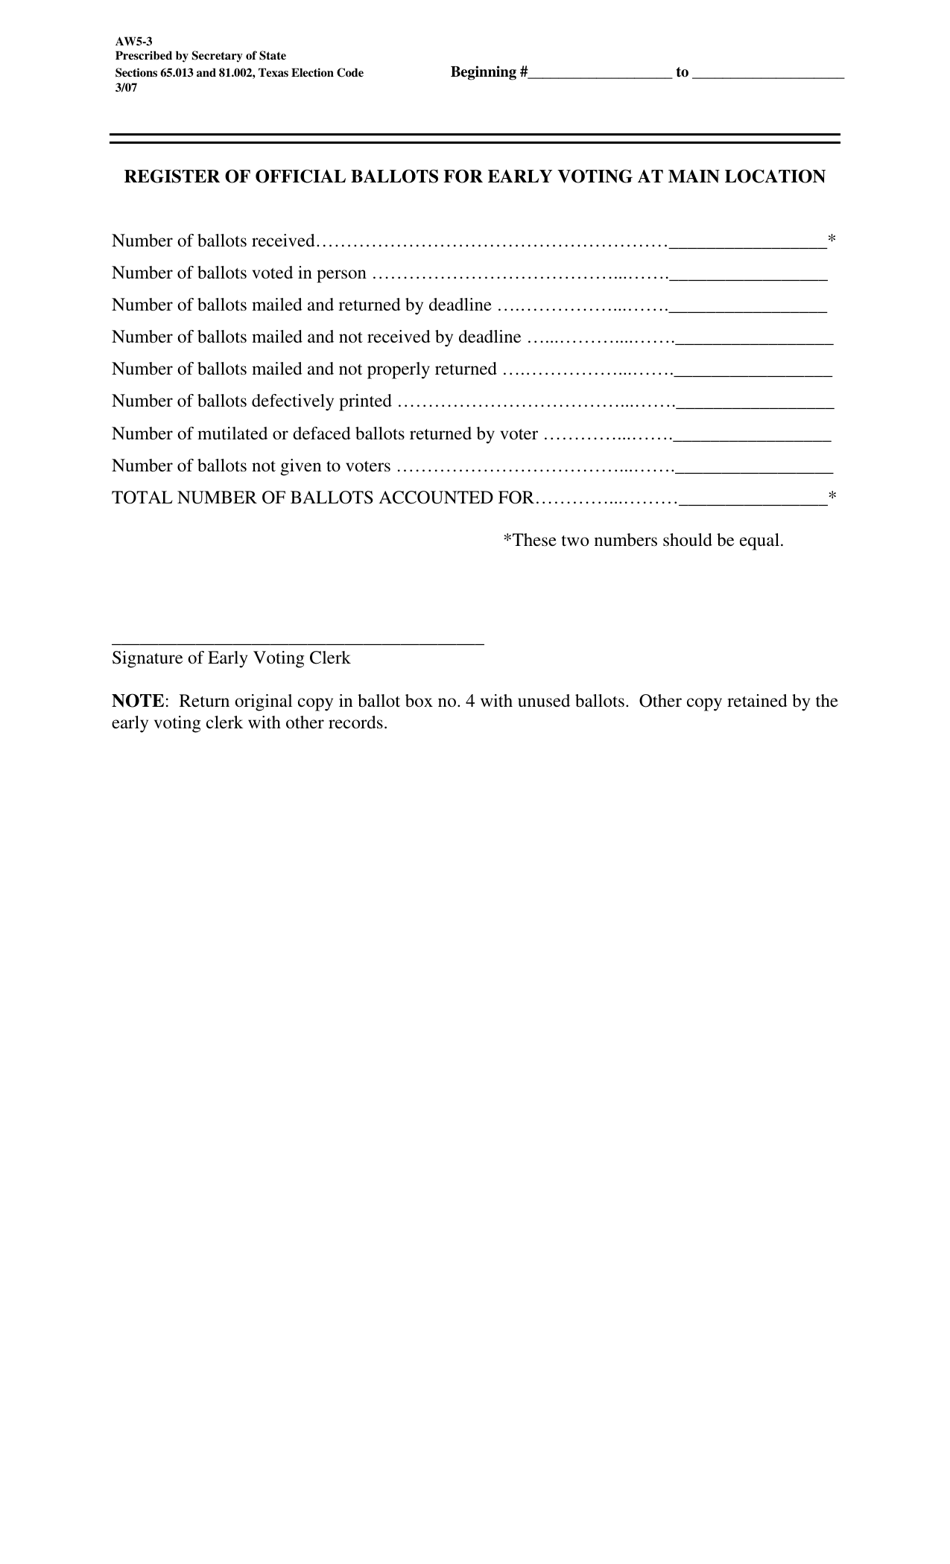 Form AW5-3 Register of Official Ballots for Early Voting at Main Location - Texas, Page 1